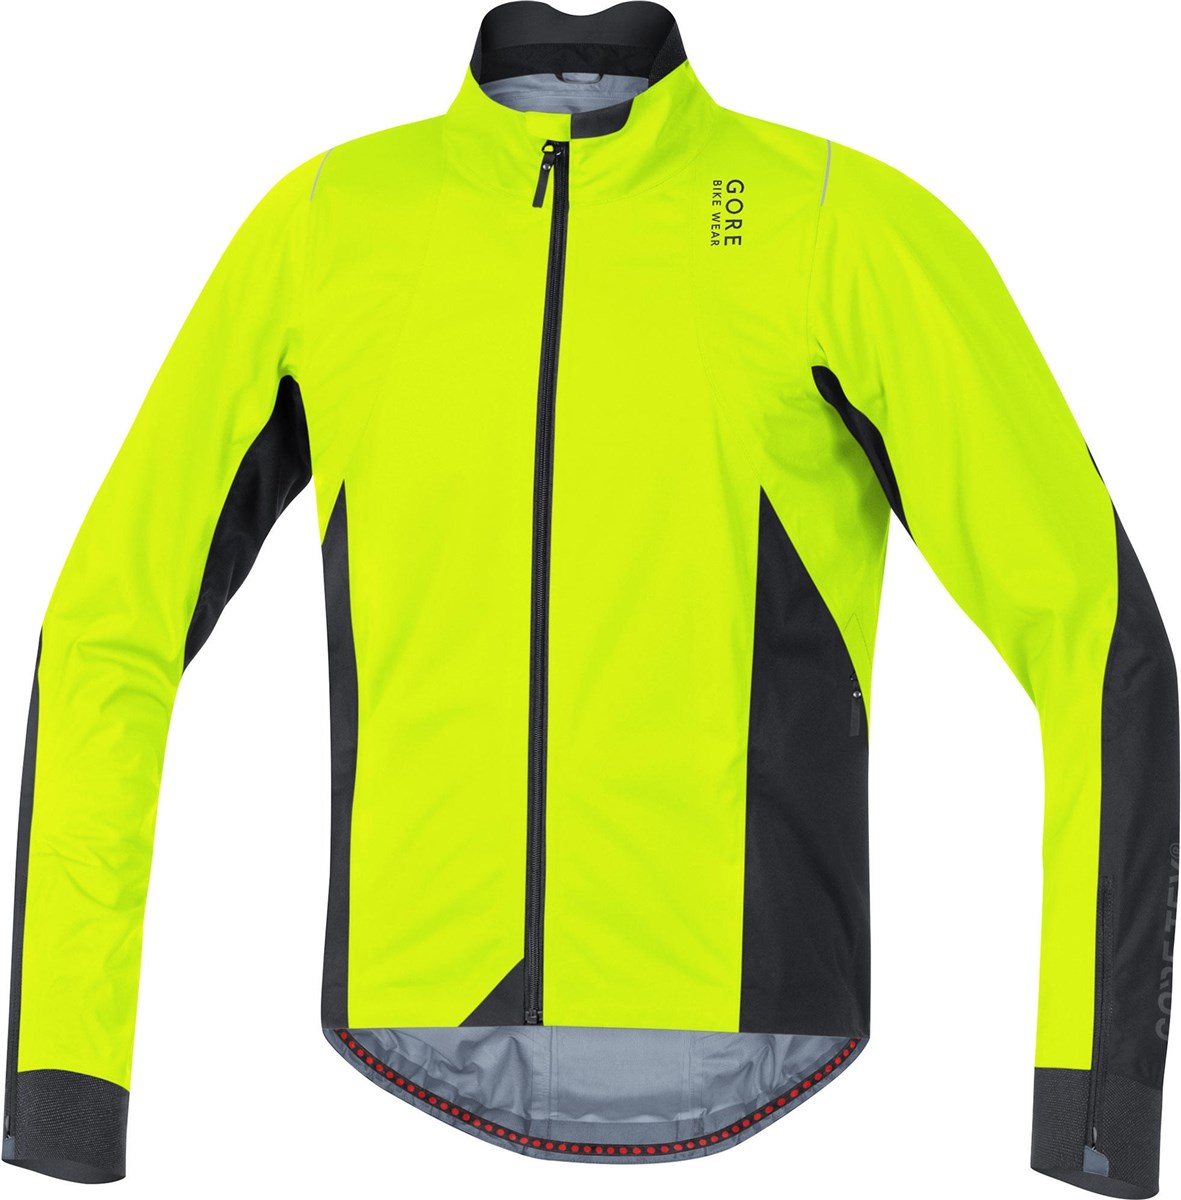 Gore Oxygen 2.0 Gore-Tex Active Jacket SS17 product image